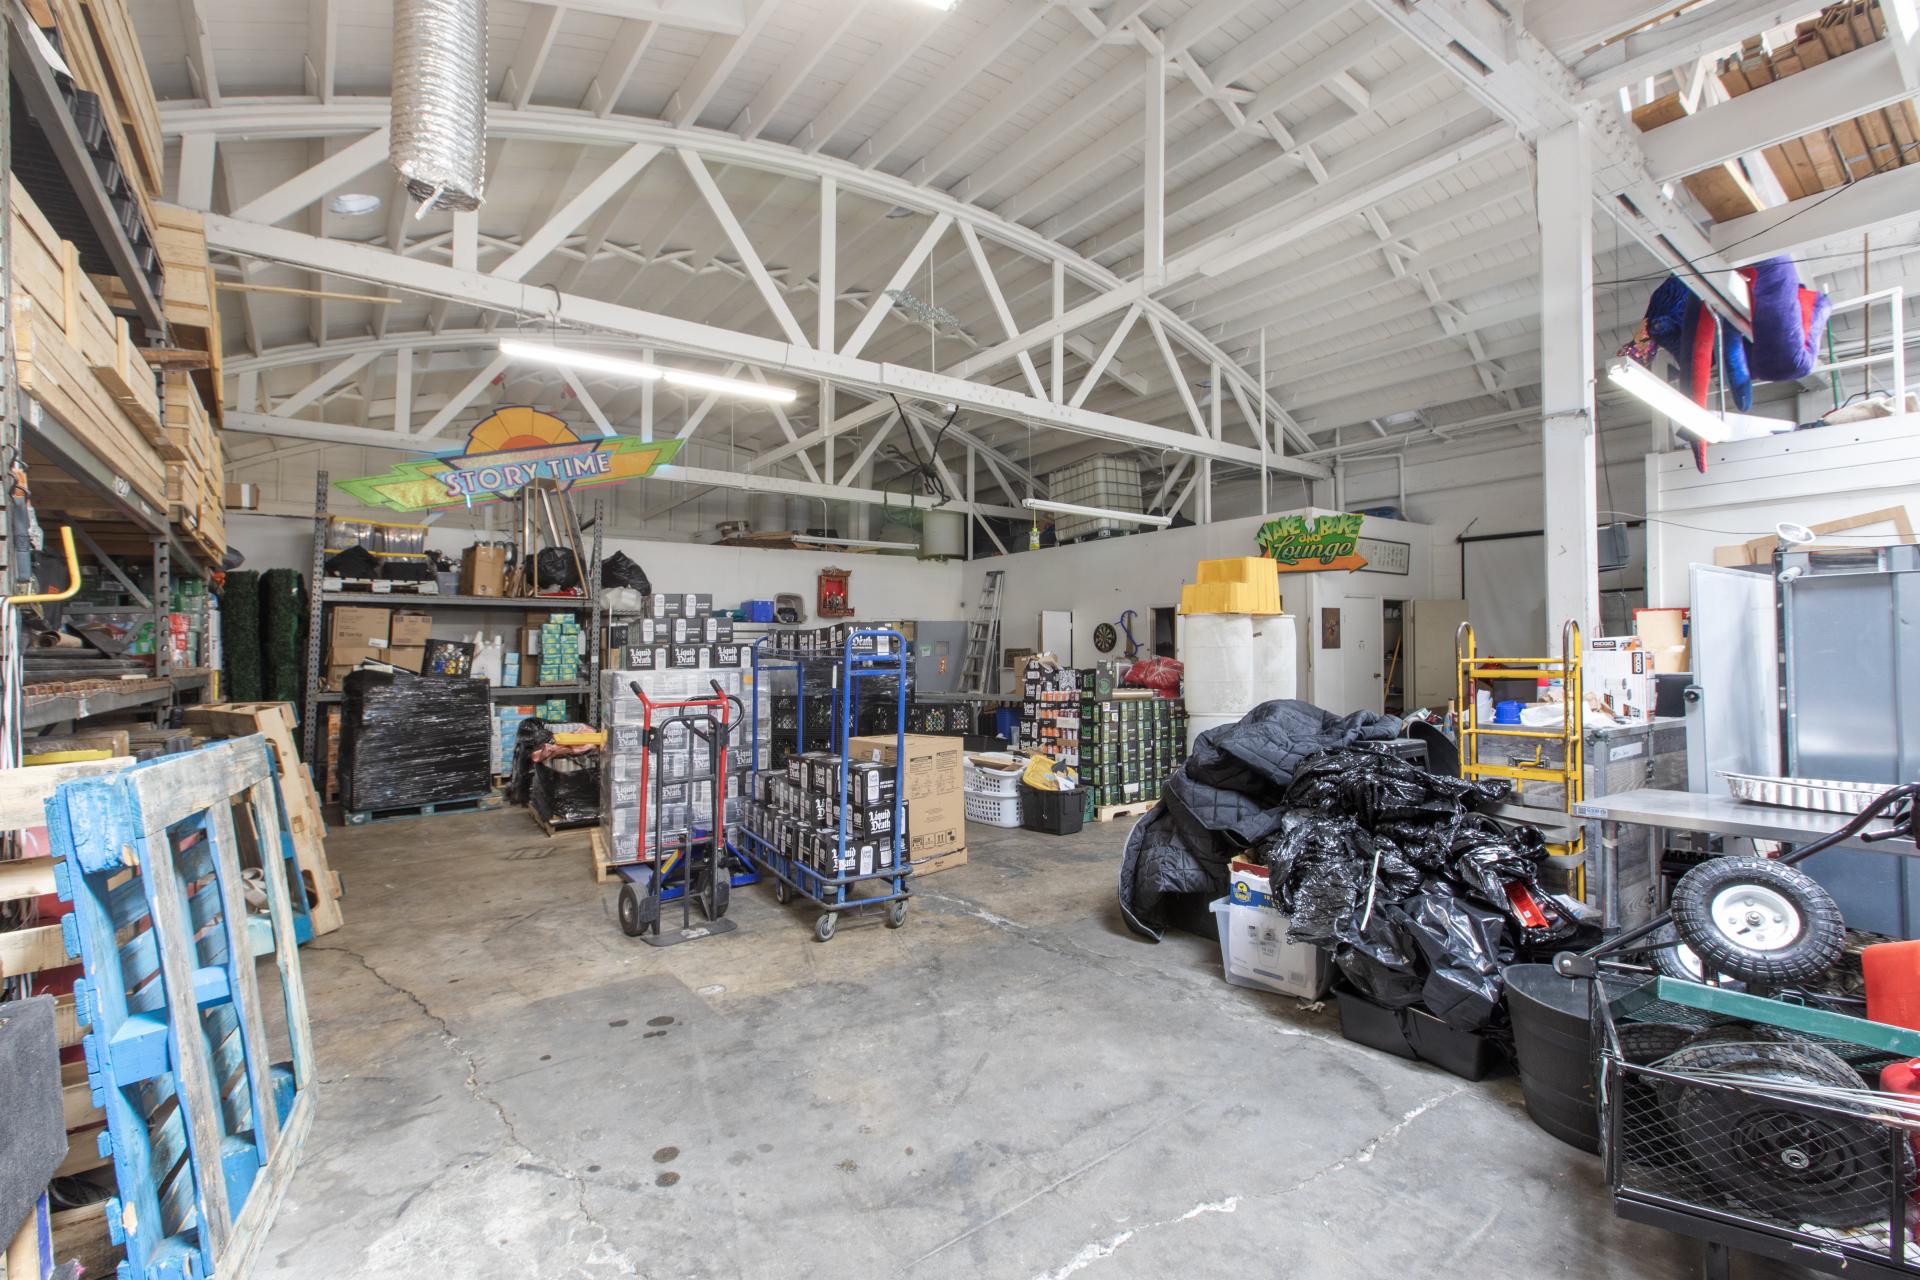 inside the warehouse type space